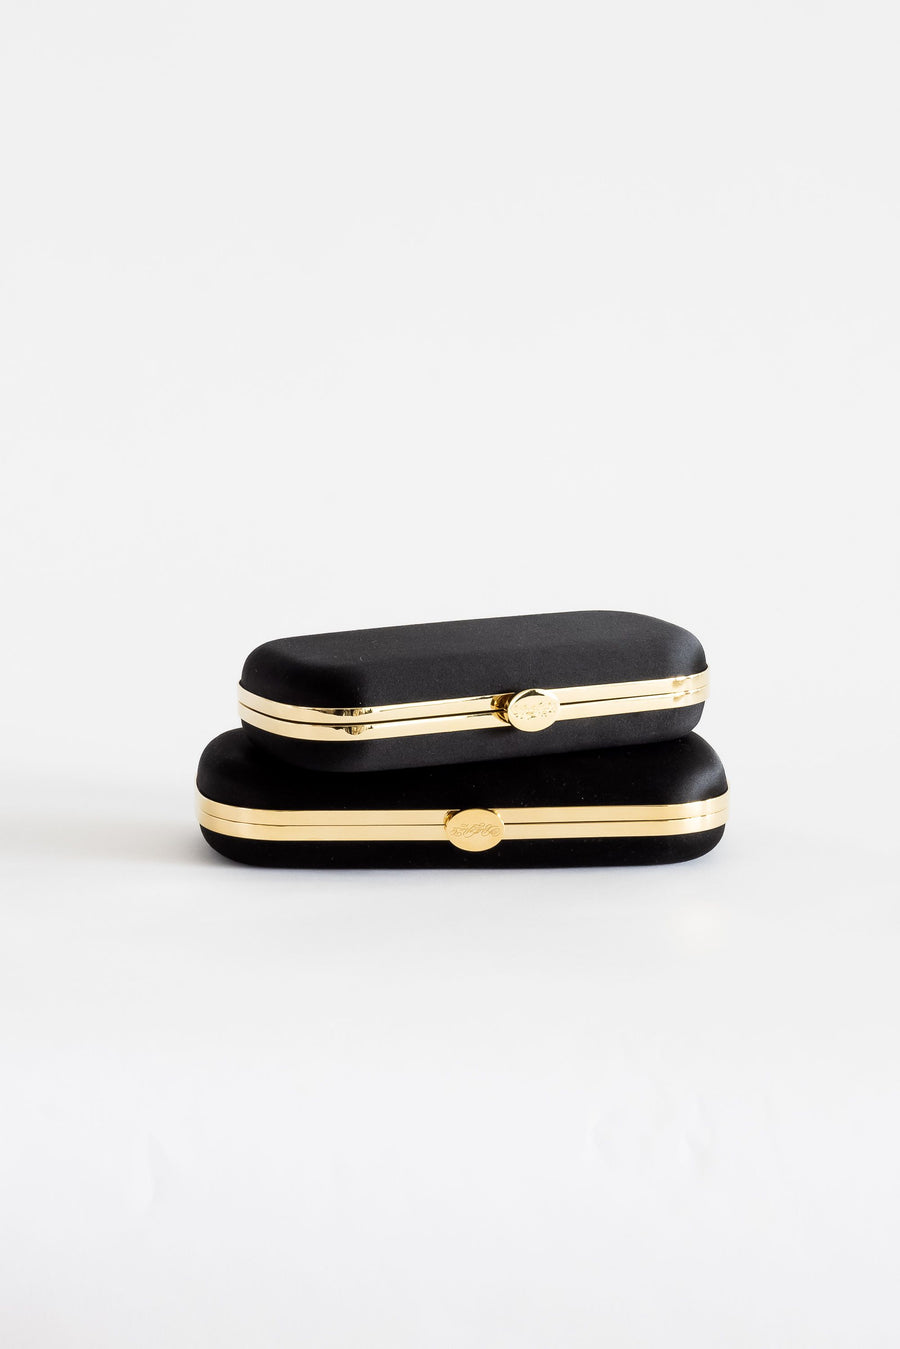 two Black Satin Bella Clutches from The Bella Rosa Collection on a white surface.